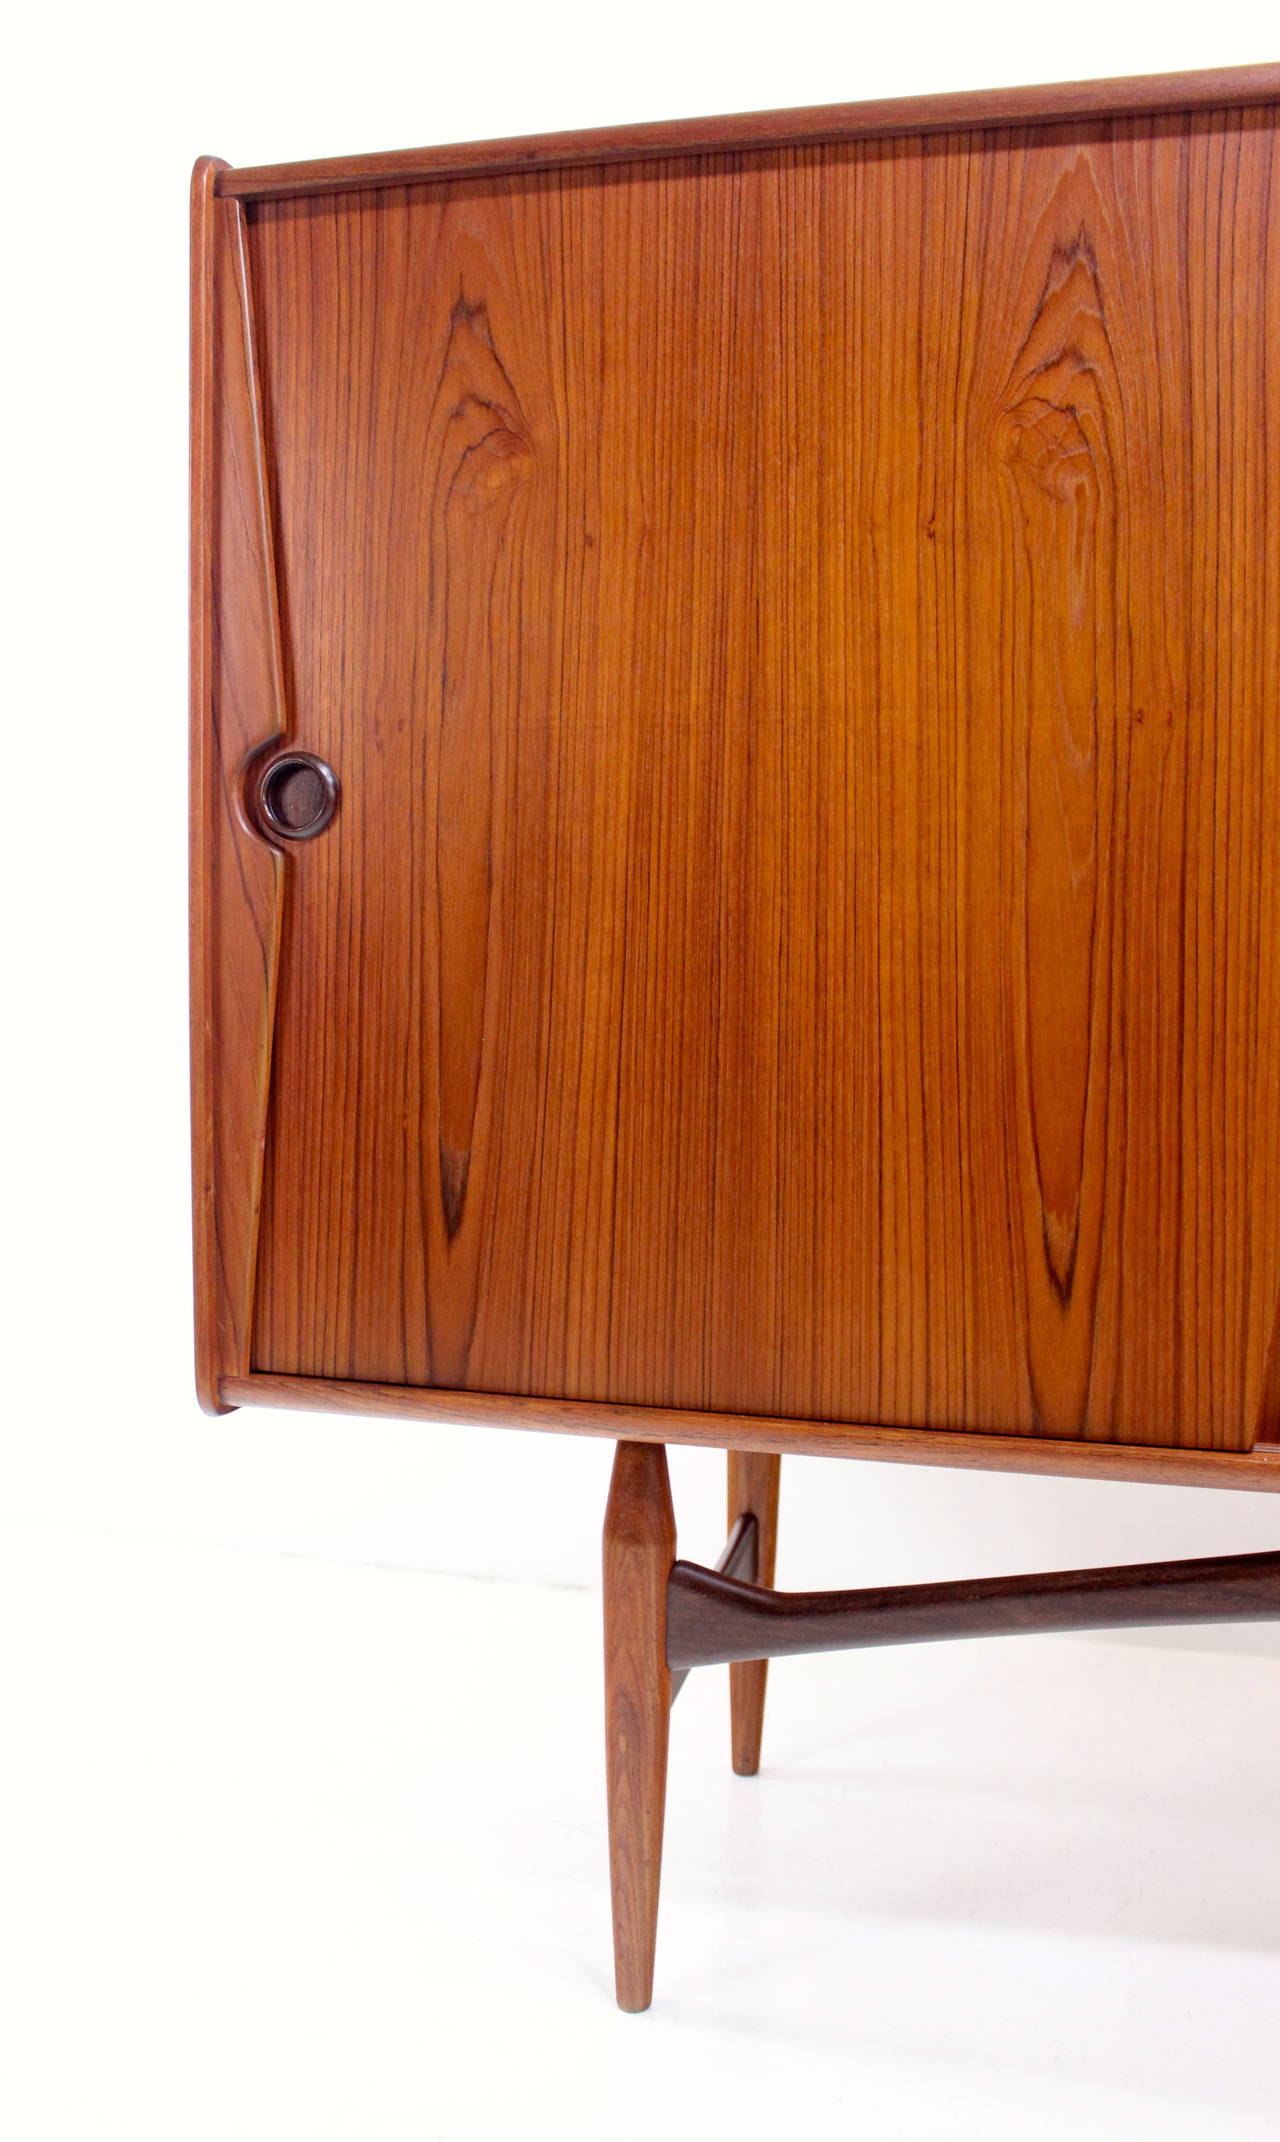 Exceptional Danish Modern Teak Credenza with Dazzling Detailing For Sale 4